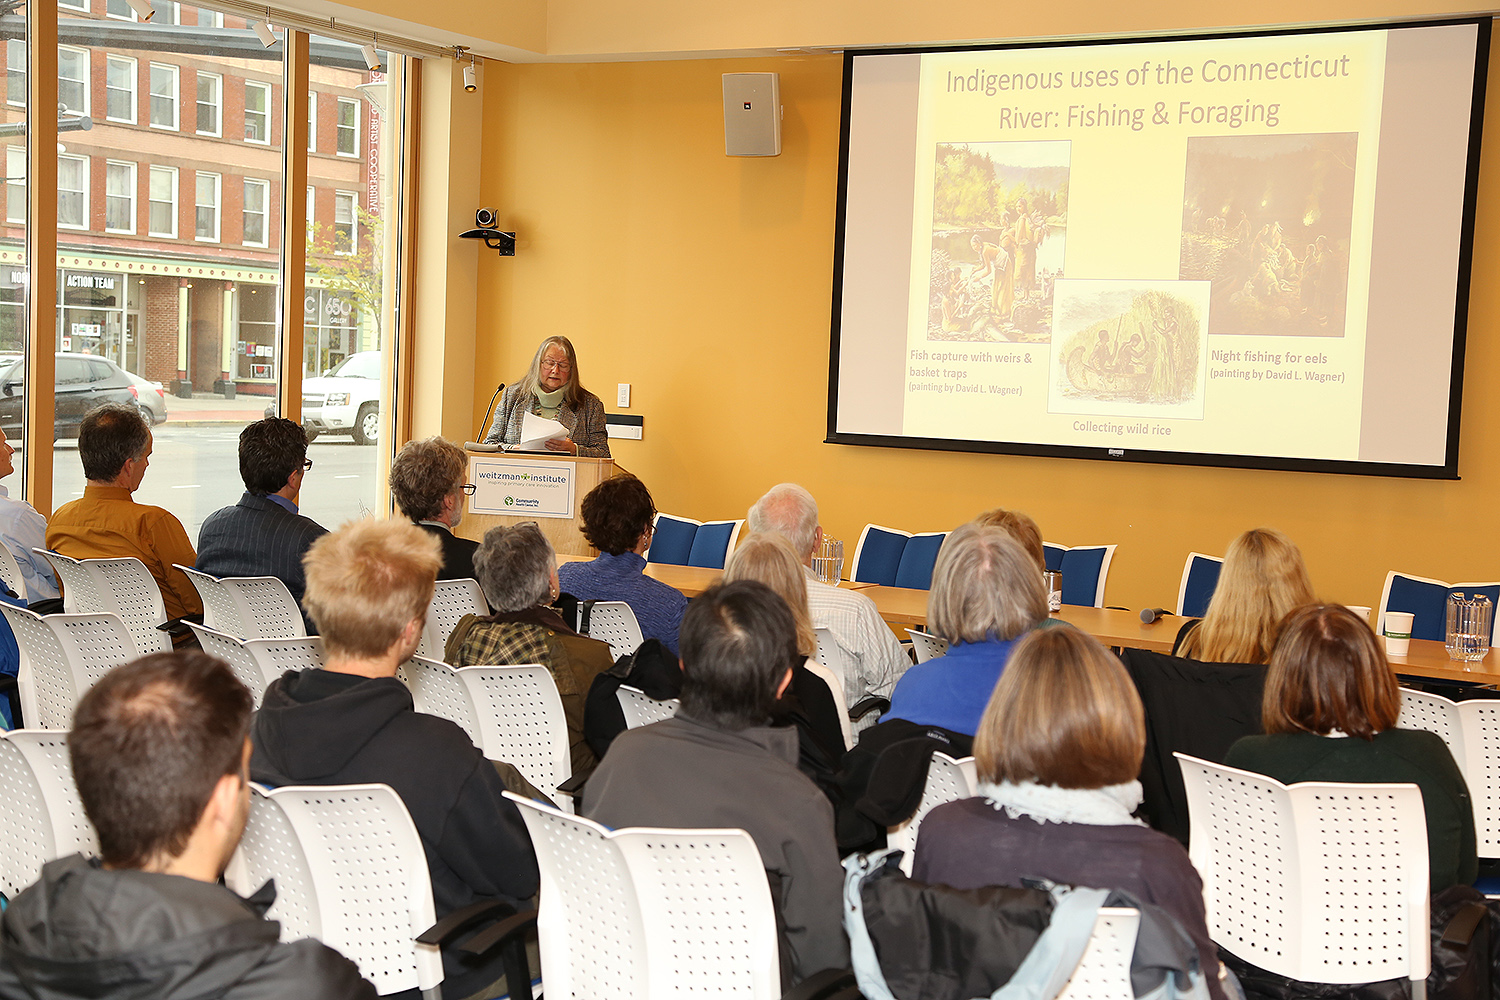 On April 26, the College of the Environment hosted a discussion on “Middletown/Mattabesset and the Connecticut River: Past, Present and Future” in the Community Health Center in Middletown. Several Wesleyan staff and faculty attended, along with members of the Middletown community. 